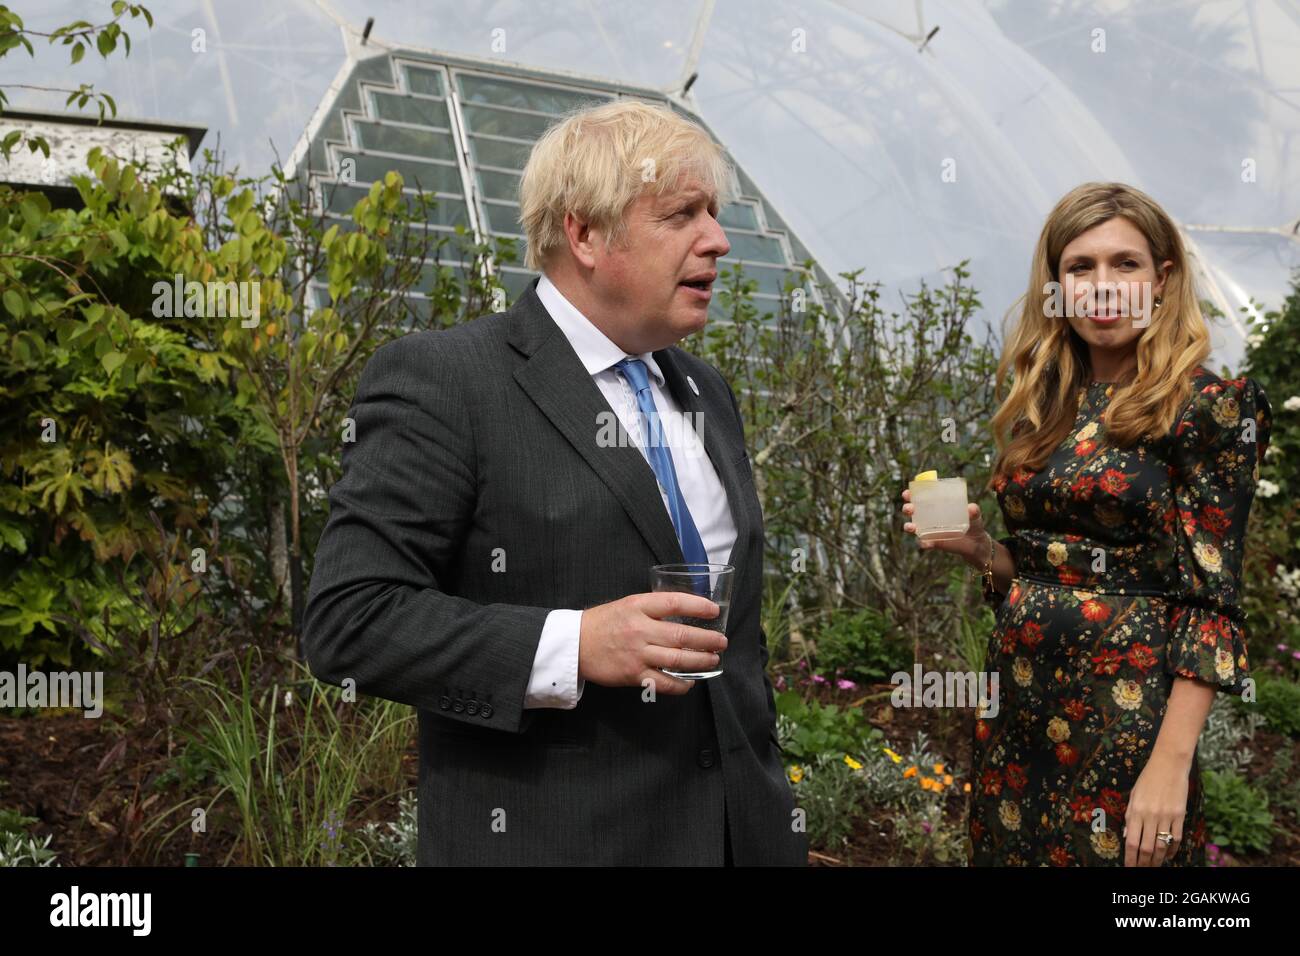 File photo dated 11/6/2021 of Prime Minister Boris Johnson and Carrie Johnson arriving for a reception at the Eden Project for G7 leaders, during the G7 summit in Cornwall. The Prime Minister and his wife are expecting a second child after she revealed the heartbreak of a miscarriage at the start of the year. In a statement on social media, Ms Johnson said the brother or sister to their first child Wilfred was due to arrive 'this Christmas'. Issue date: Saturday July 31, 2021. Stock Photo